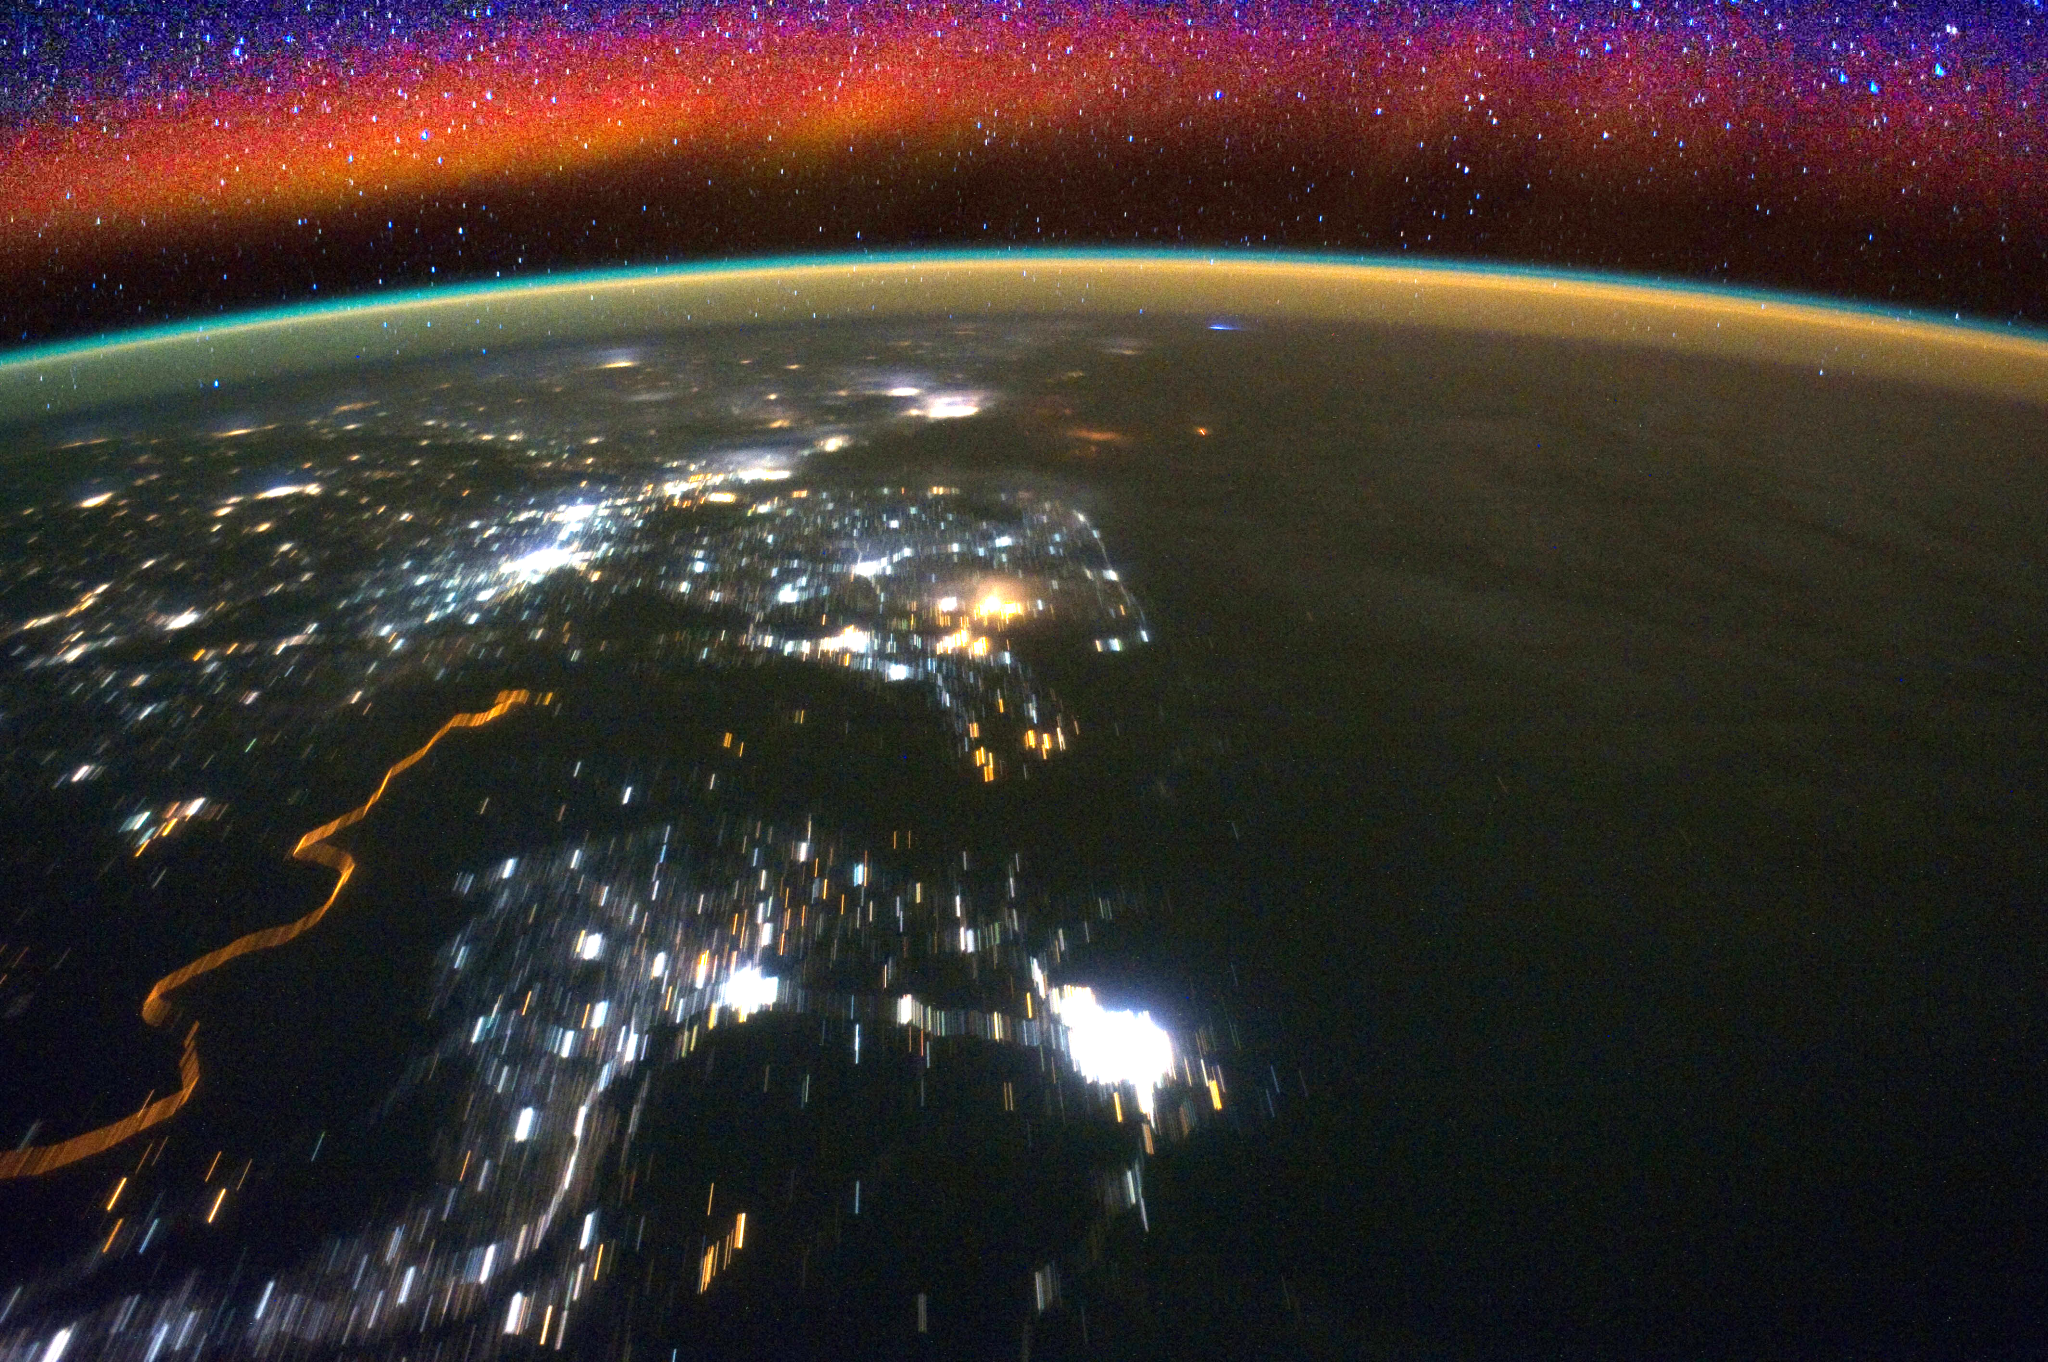 Processes in Earth’s ionosphere create bright swaths of color in the sky, known as airglow, as seen here in an image.